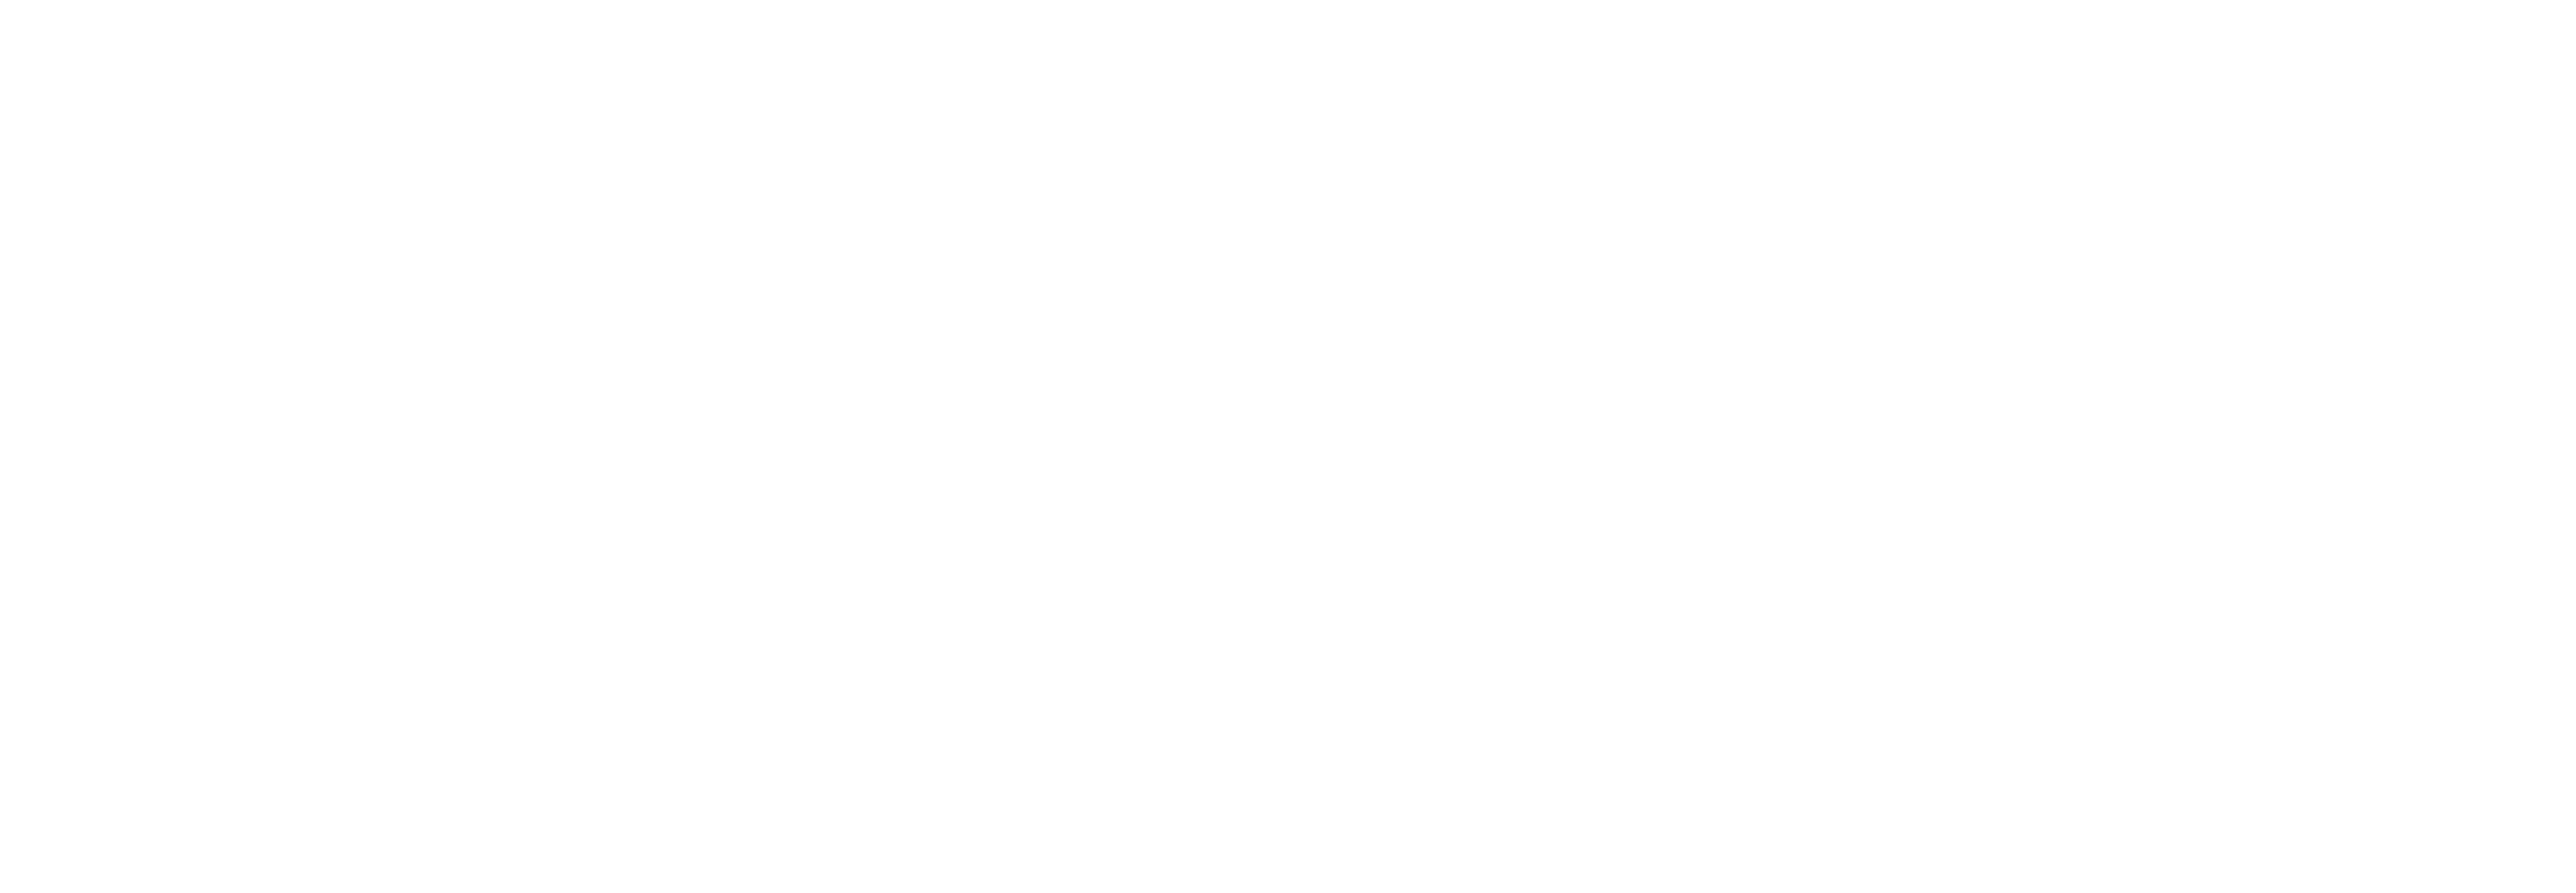 Statewide Home Health Care  logo